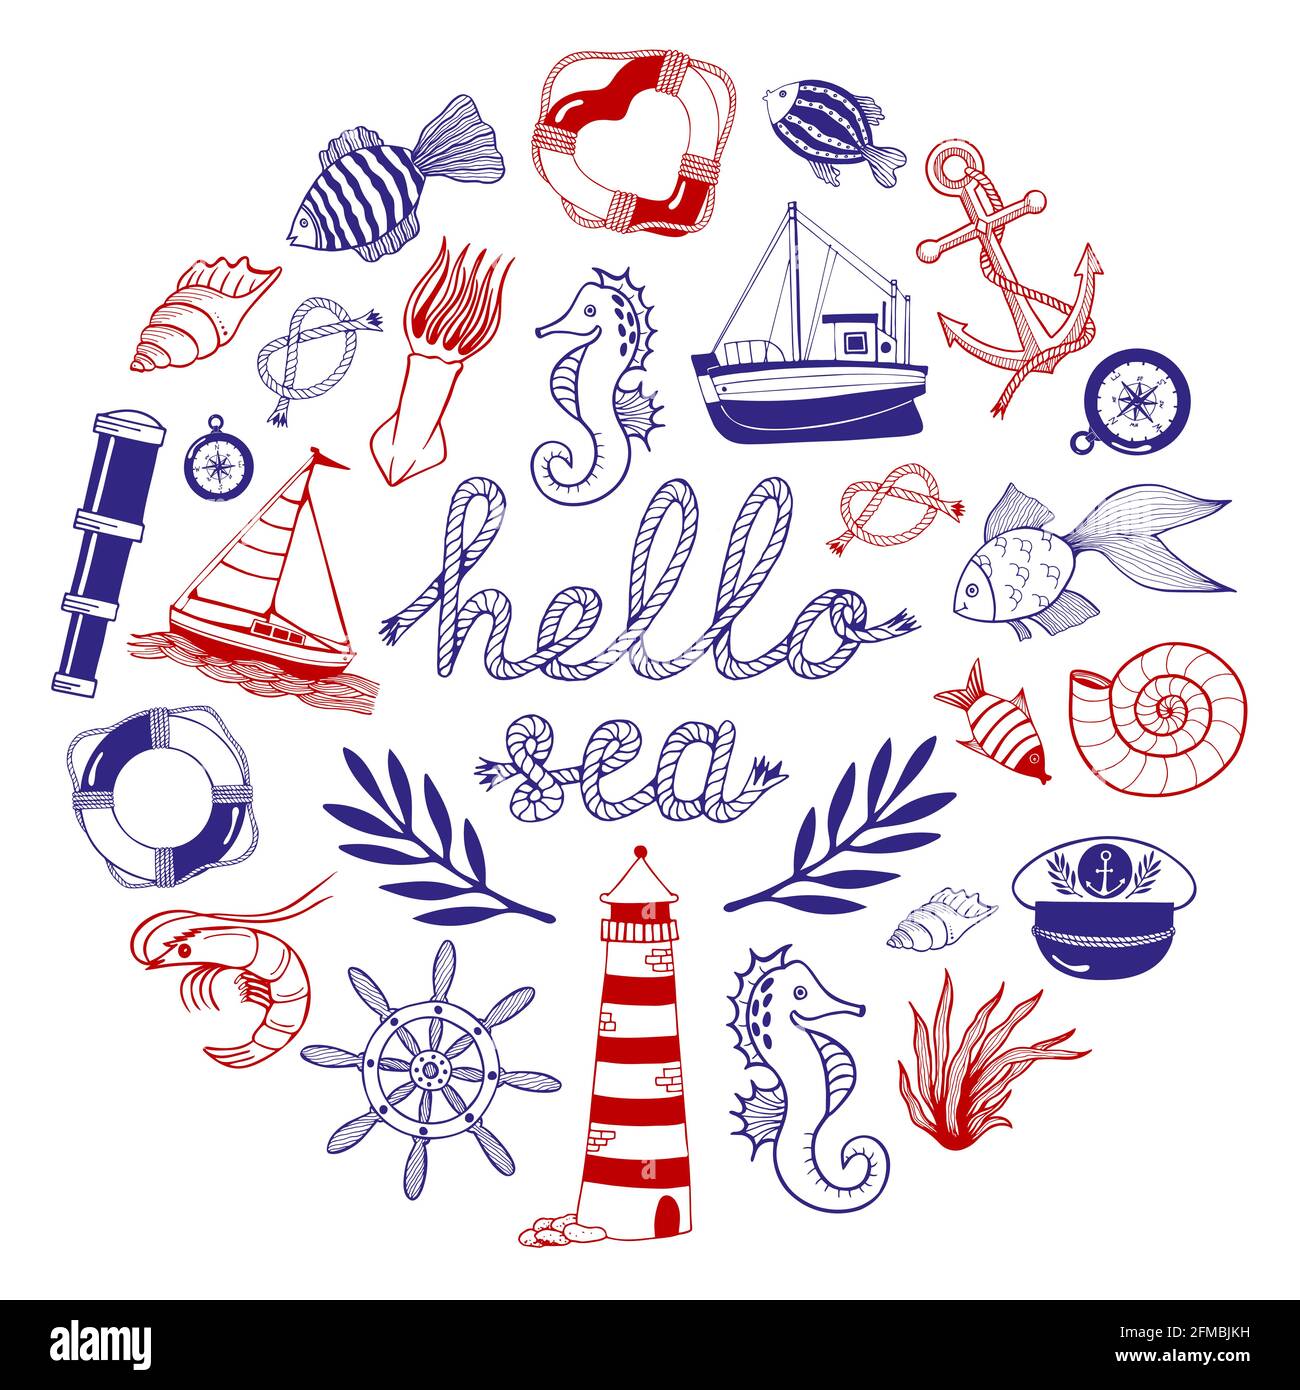 Set of nautical icons and design elements Stock Vector